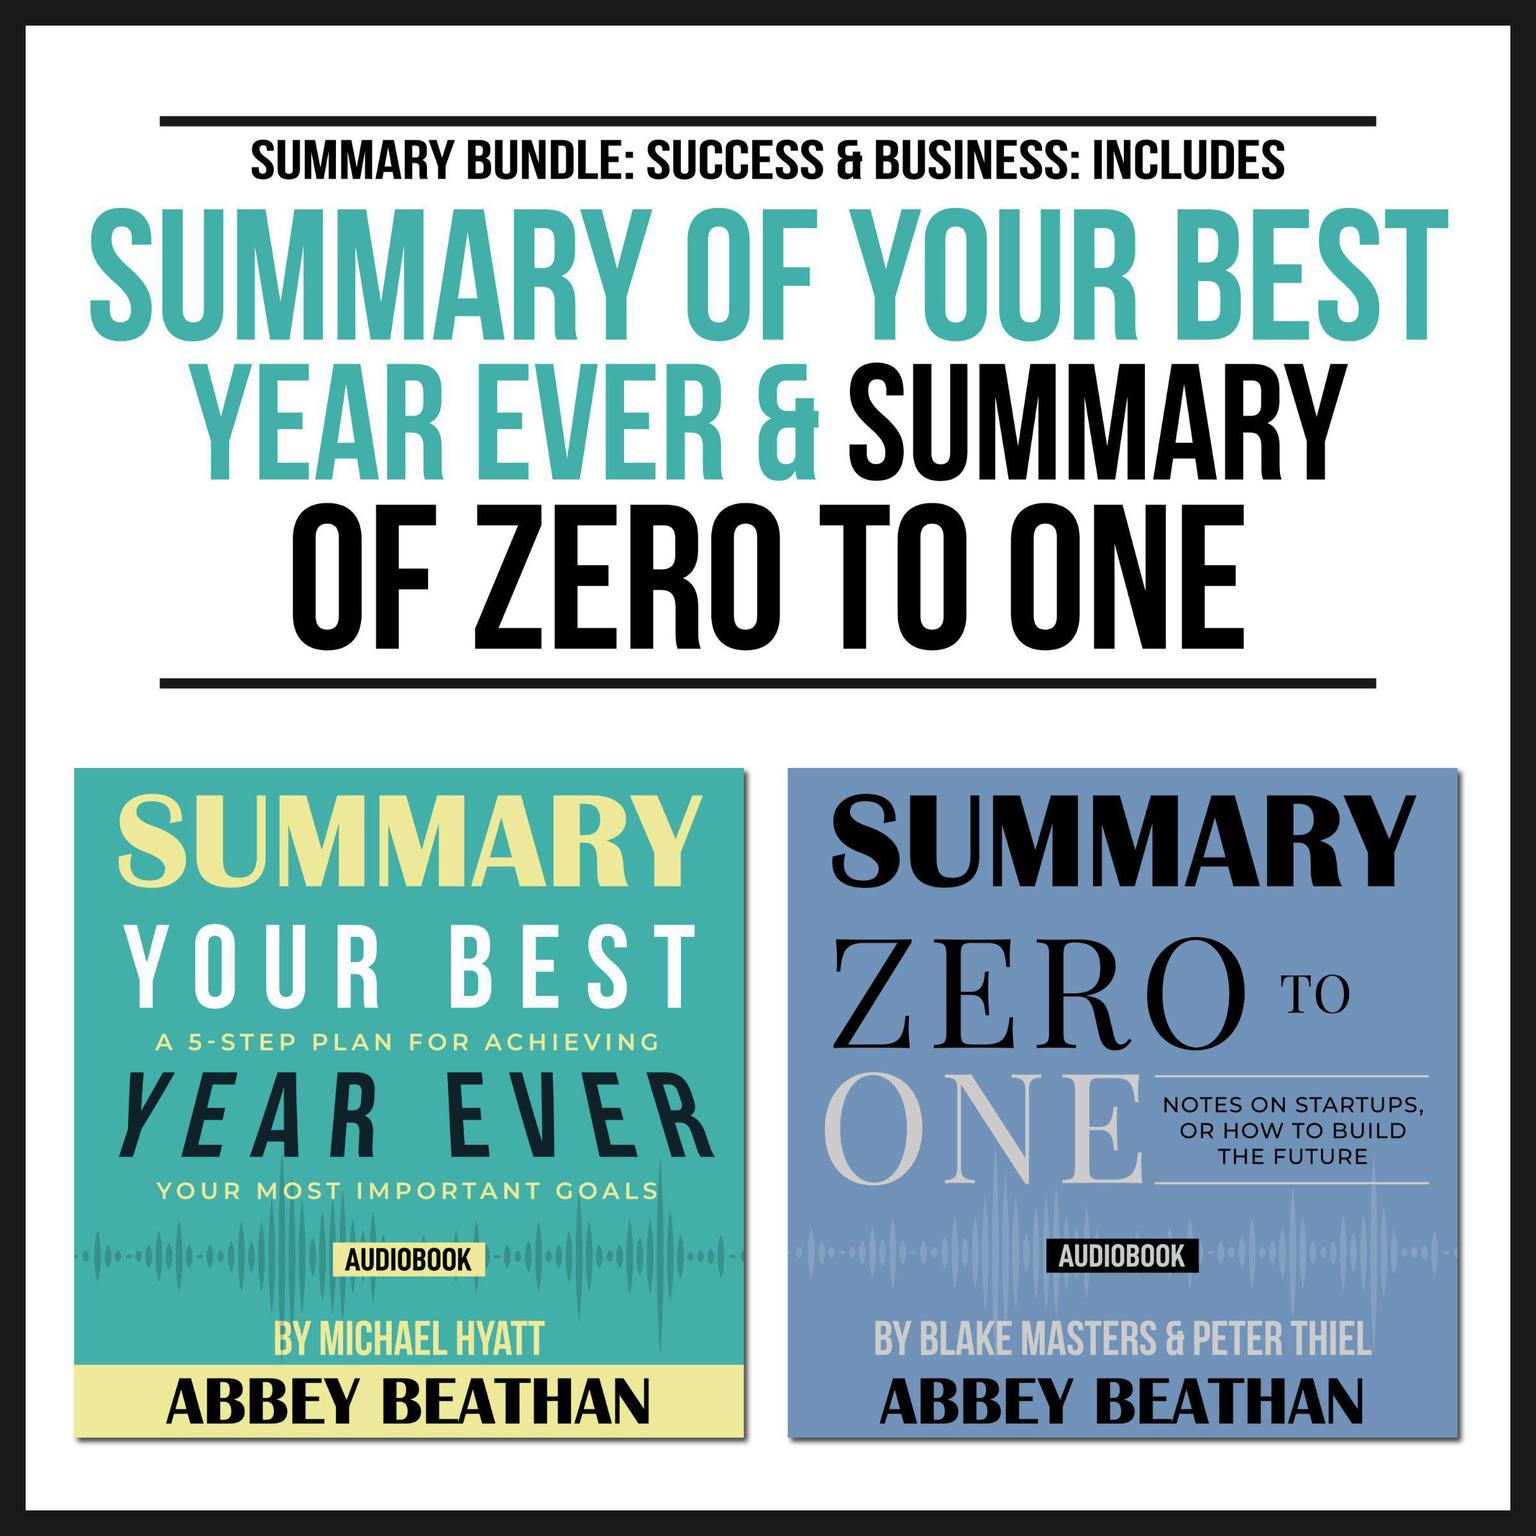 Summary Bundle: Success & Business: Includes Summary of Your Best Year Ever & Summary of Zero to One Audiobook, by Abbey Beathan